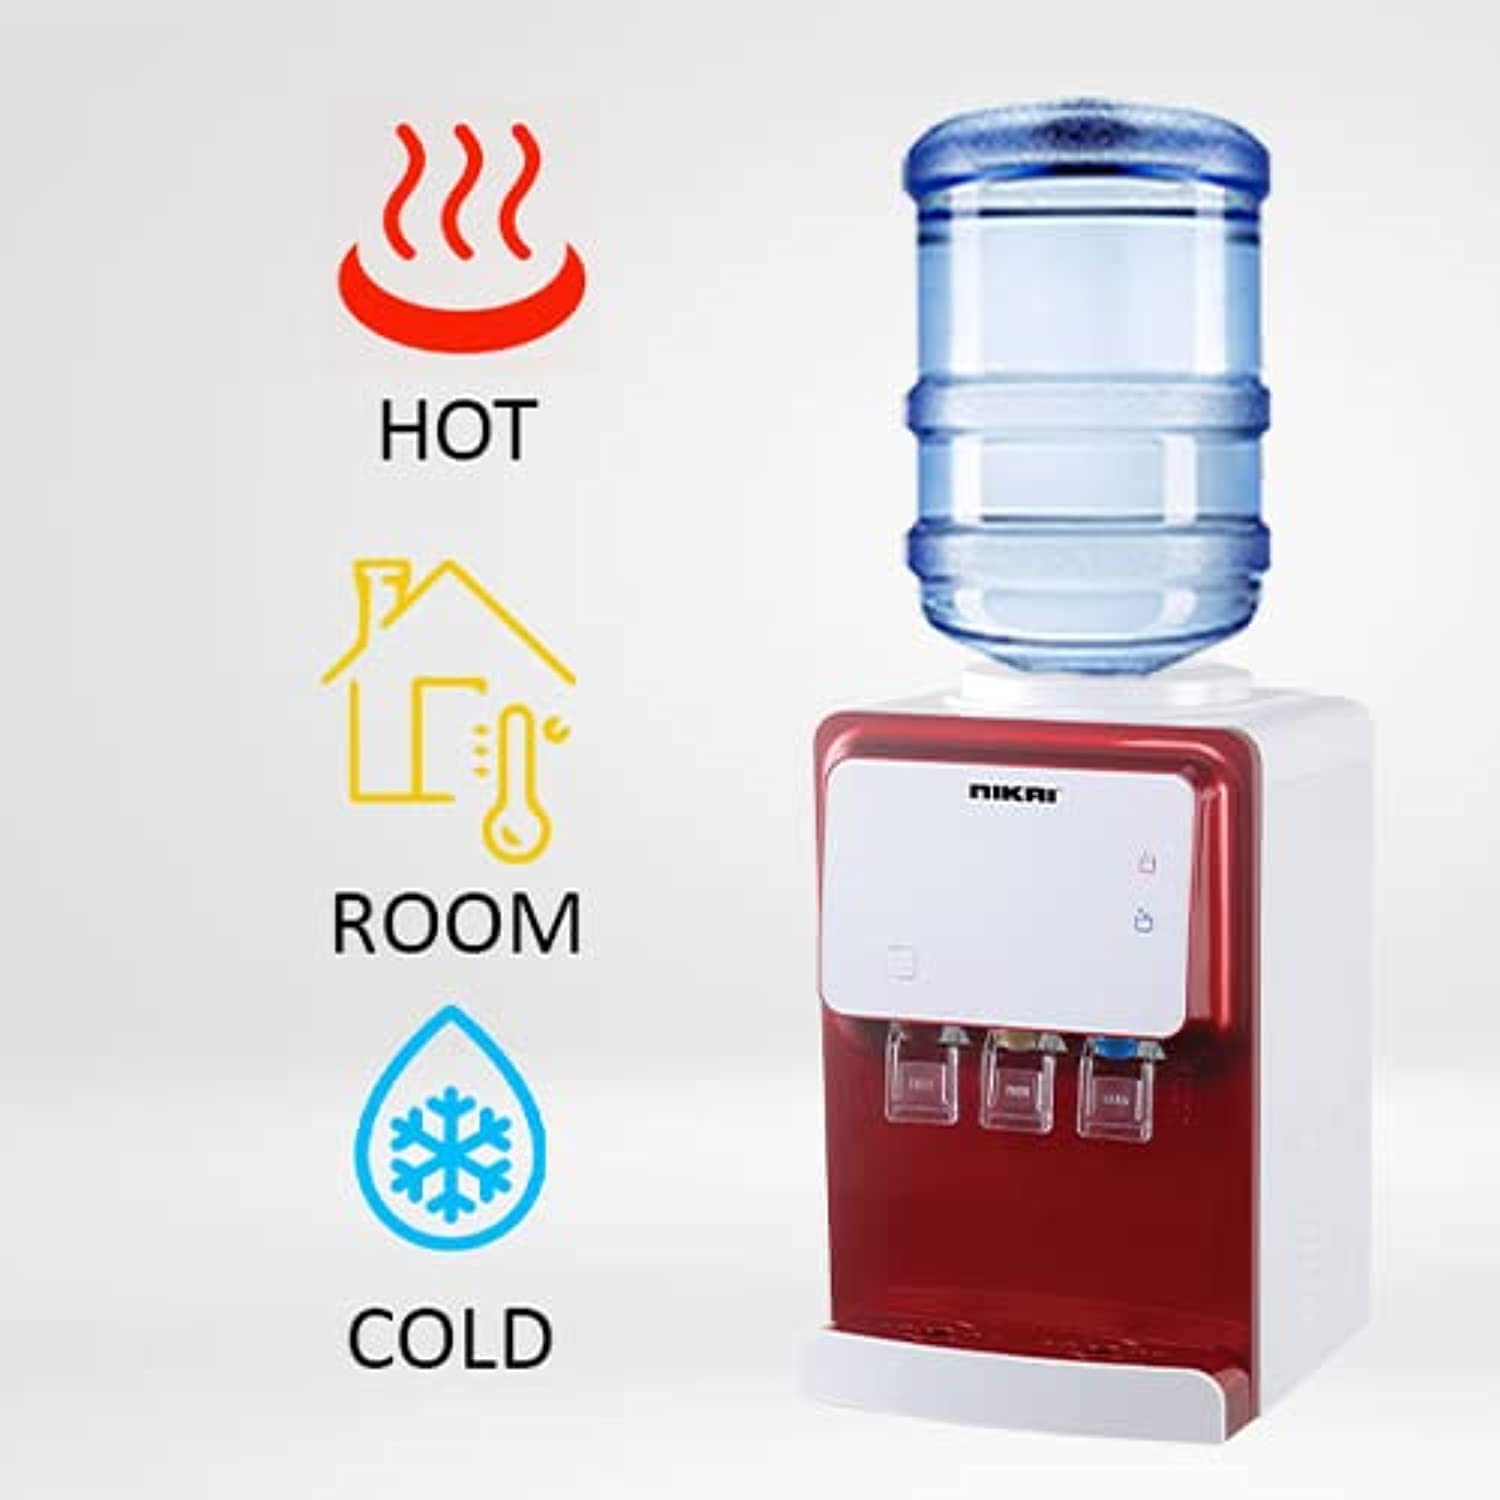 Nikai Top Loading Water Dispenser, 3 Tap Design: Hot, Normal, Cold, High-Efficiency Compressor Cooling, CFC-Free, Anti-Bacterial, Anti-Spill